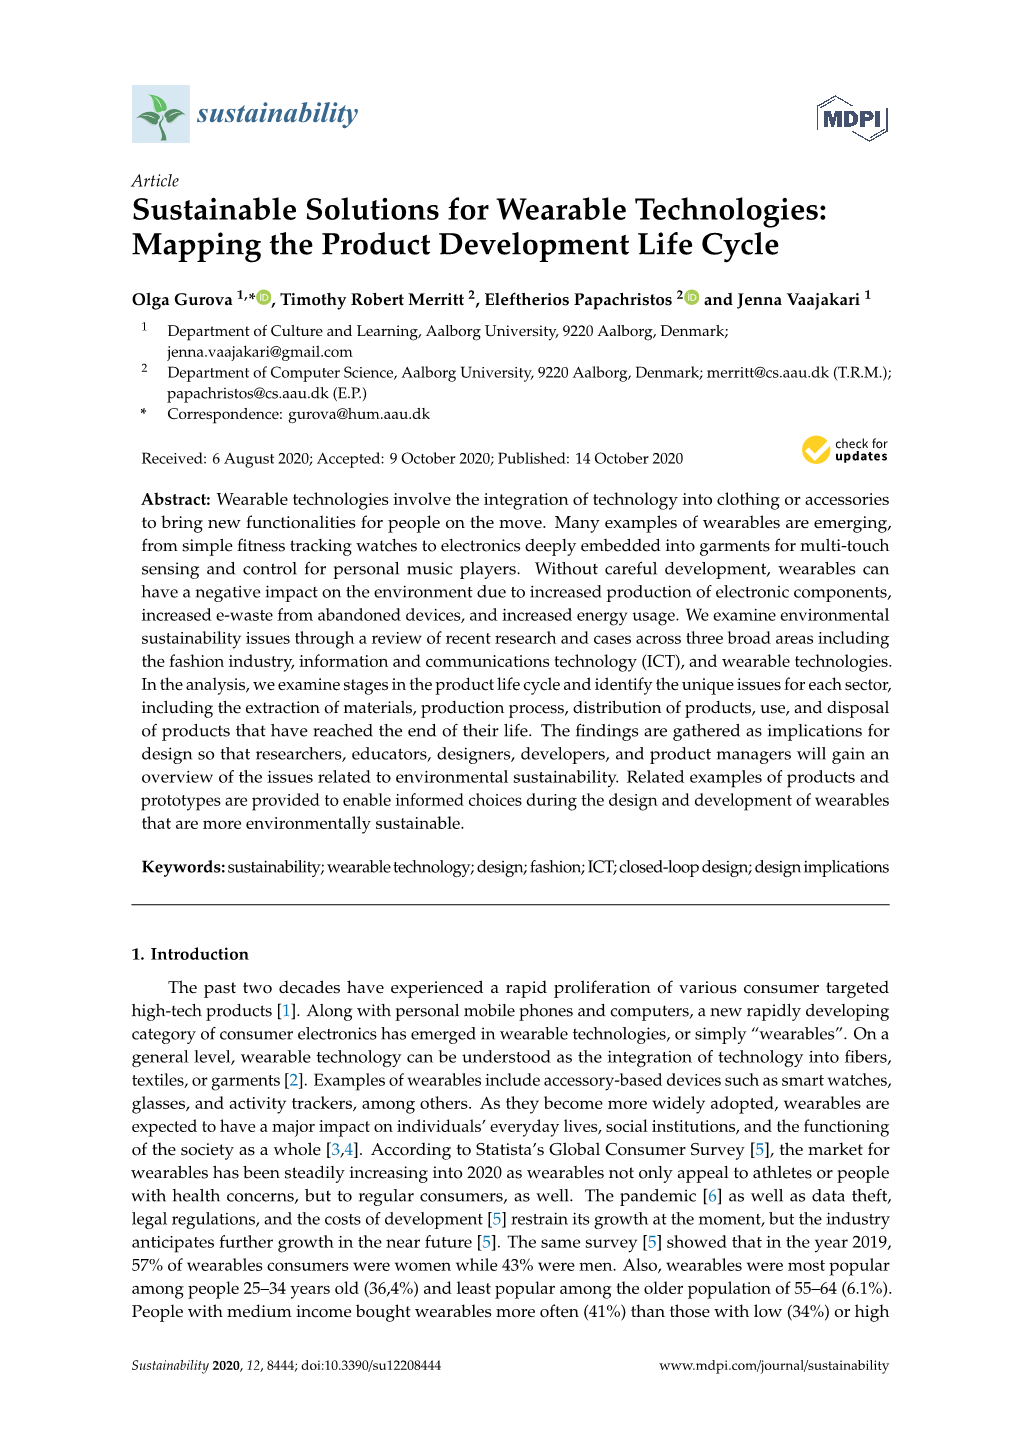 Sustainable Solutions for Wearable Technologies: Mapping the Product Development Life Cycle